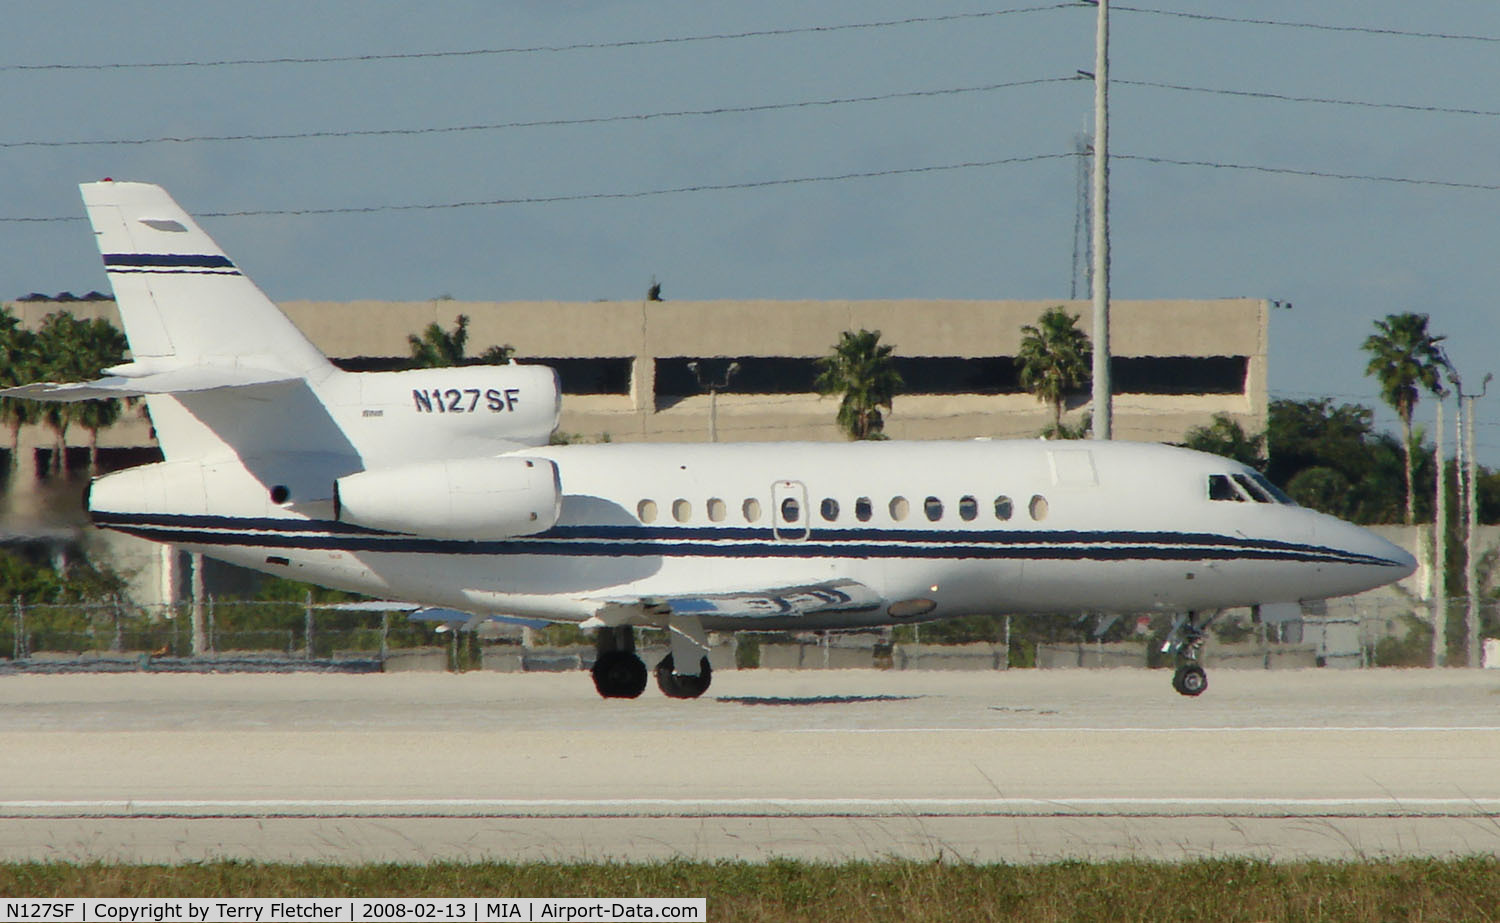 N127SF, 1997 Dassault Falcon 900EX C/N 013, Falcon 900EX about to depart Miami in the mid-afternoon heat